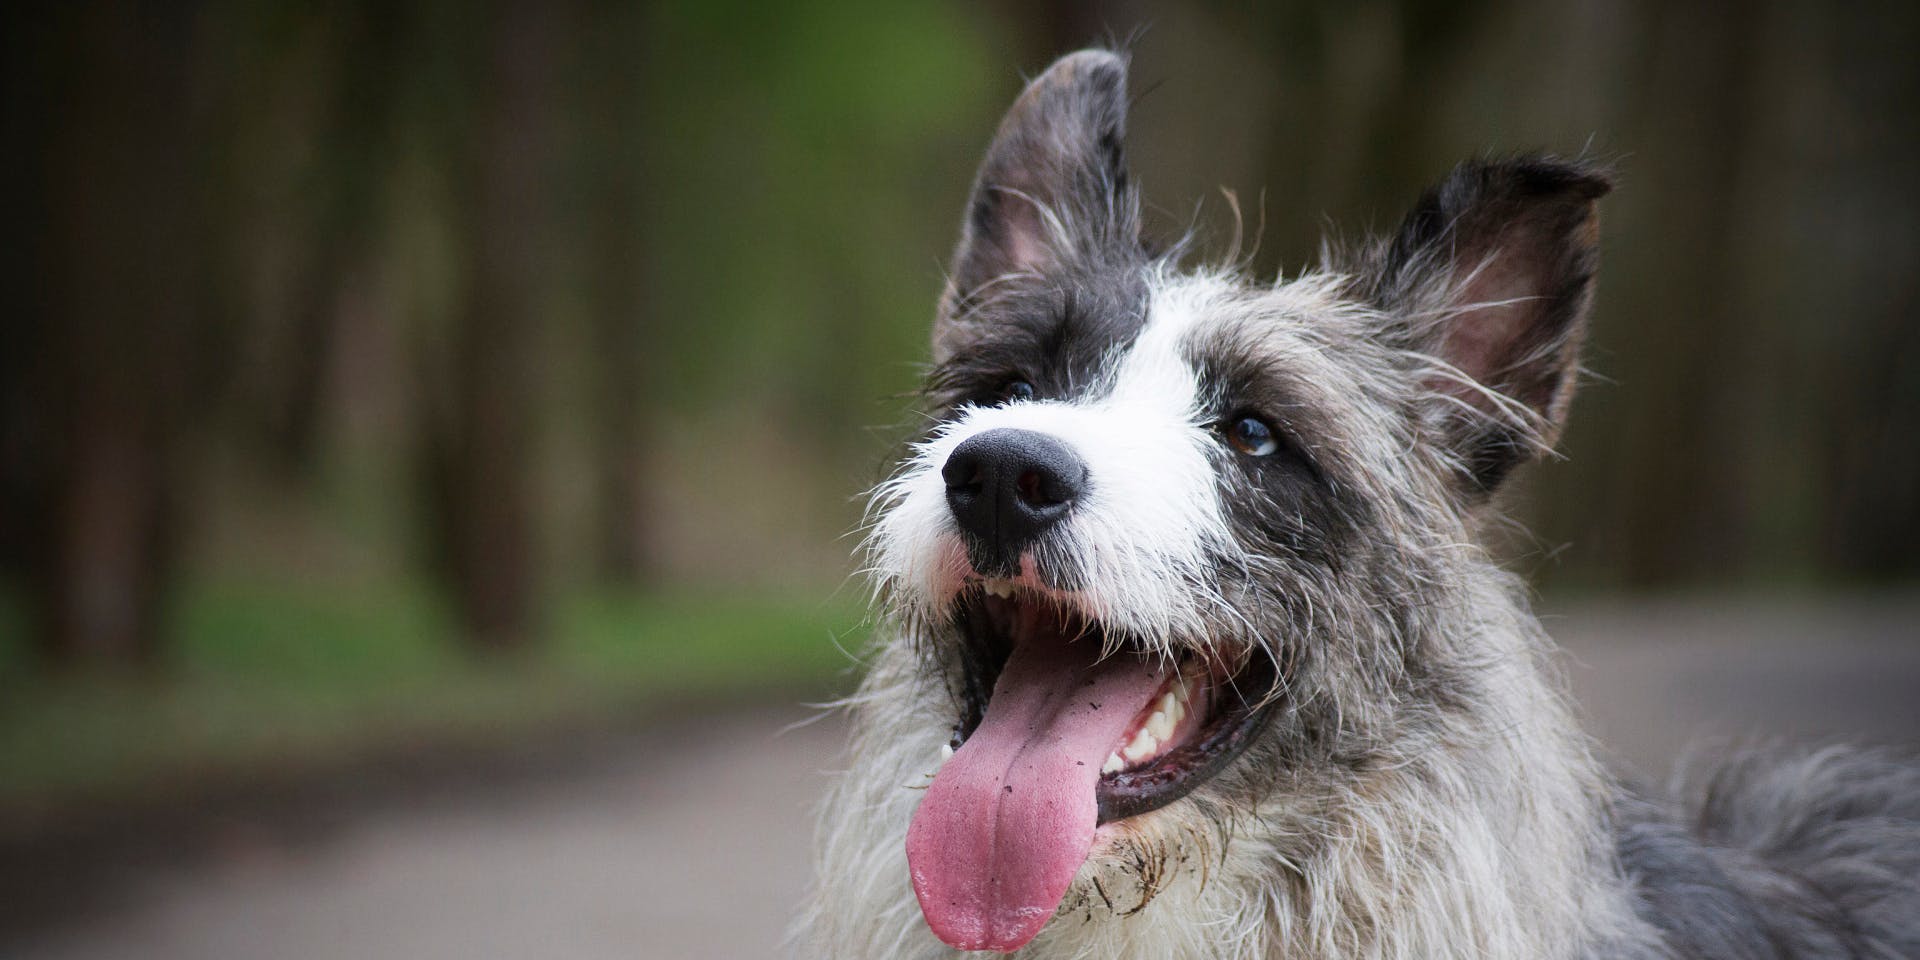 A bearded collie with a blue coat sticking its tongue out.